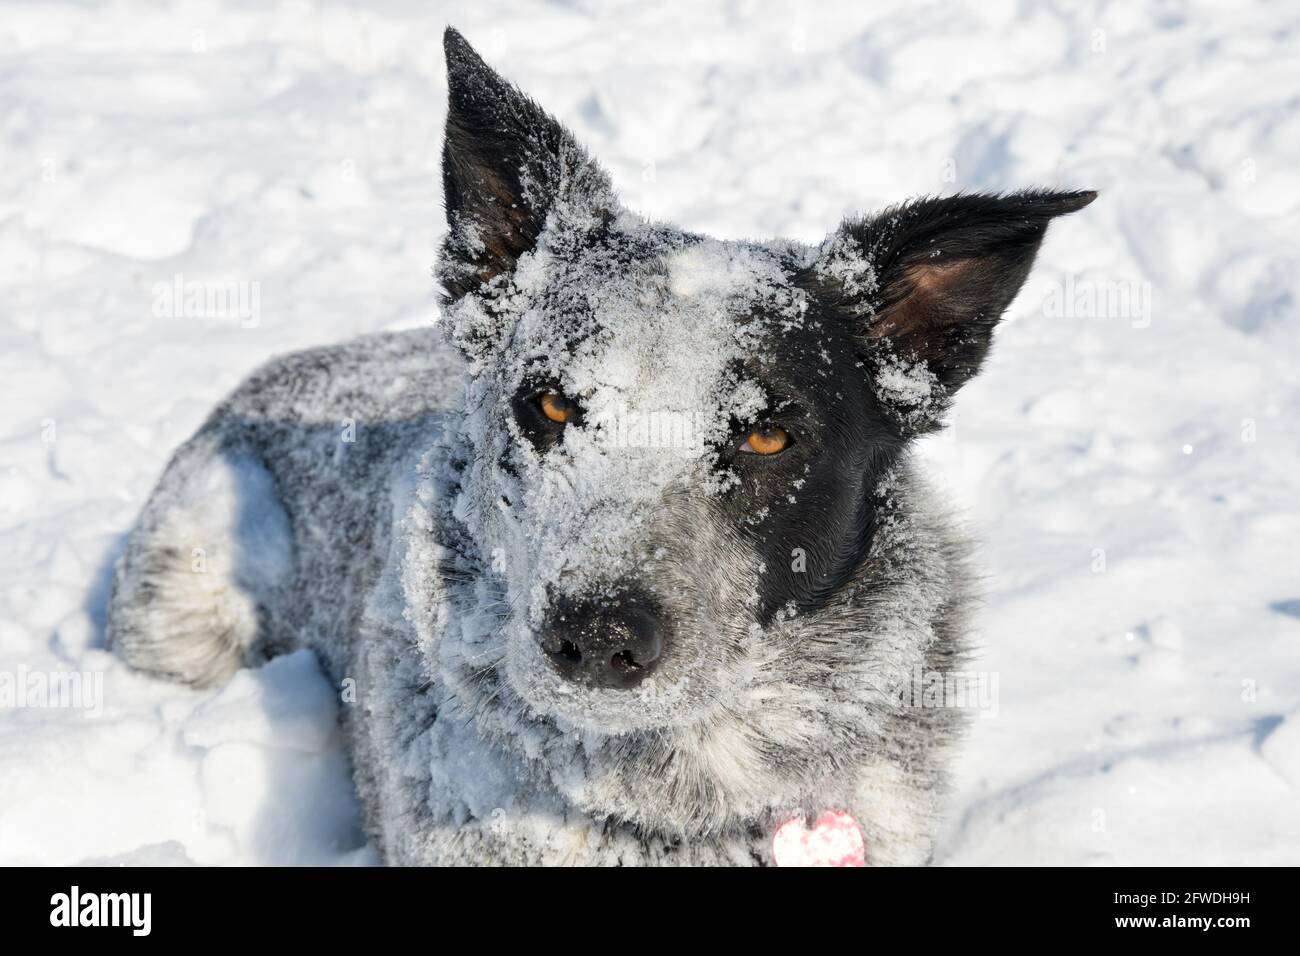 Texas Heeler dog covered in snow after playing hard in it; looking at the viewer Stock Photo